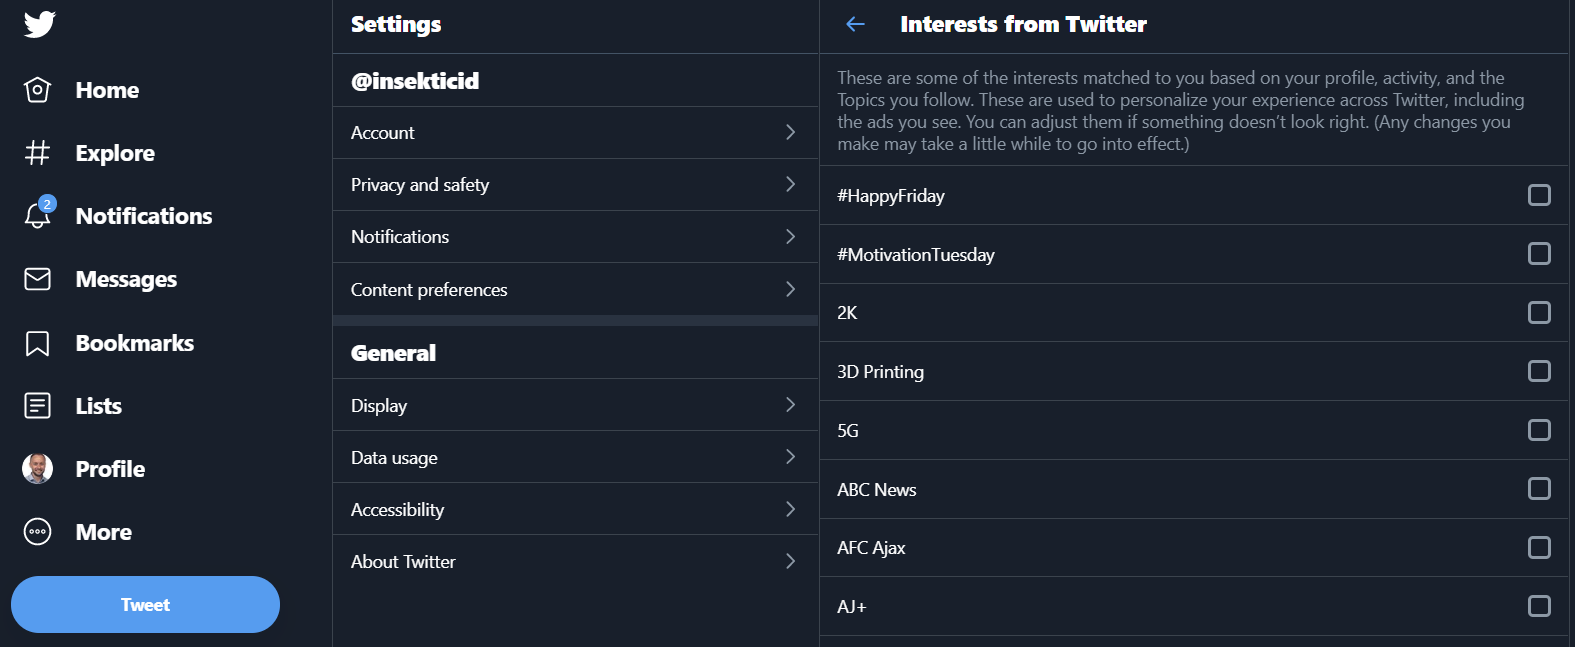 How to Turn off Topic Suggestions and Interests on Twitter?